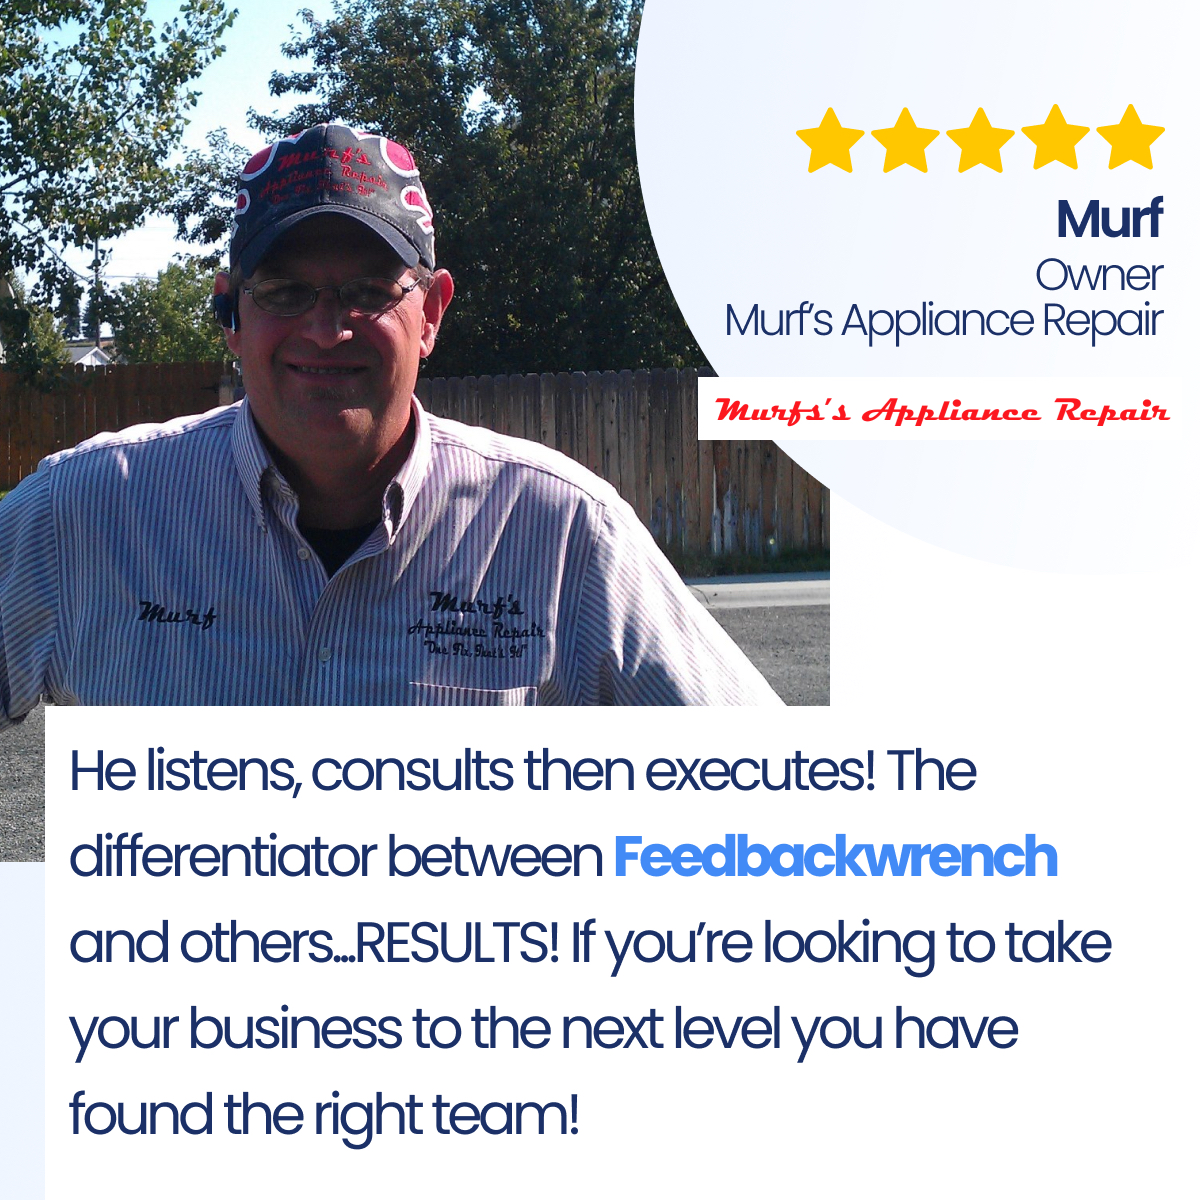 We got to help Murf do some really simple upgrades to his SEO, marketing & approach.  We're honored he left a review! #appliancerepair #contractormarketing